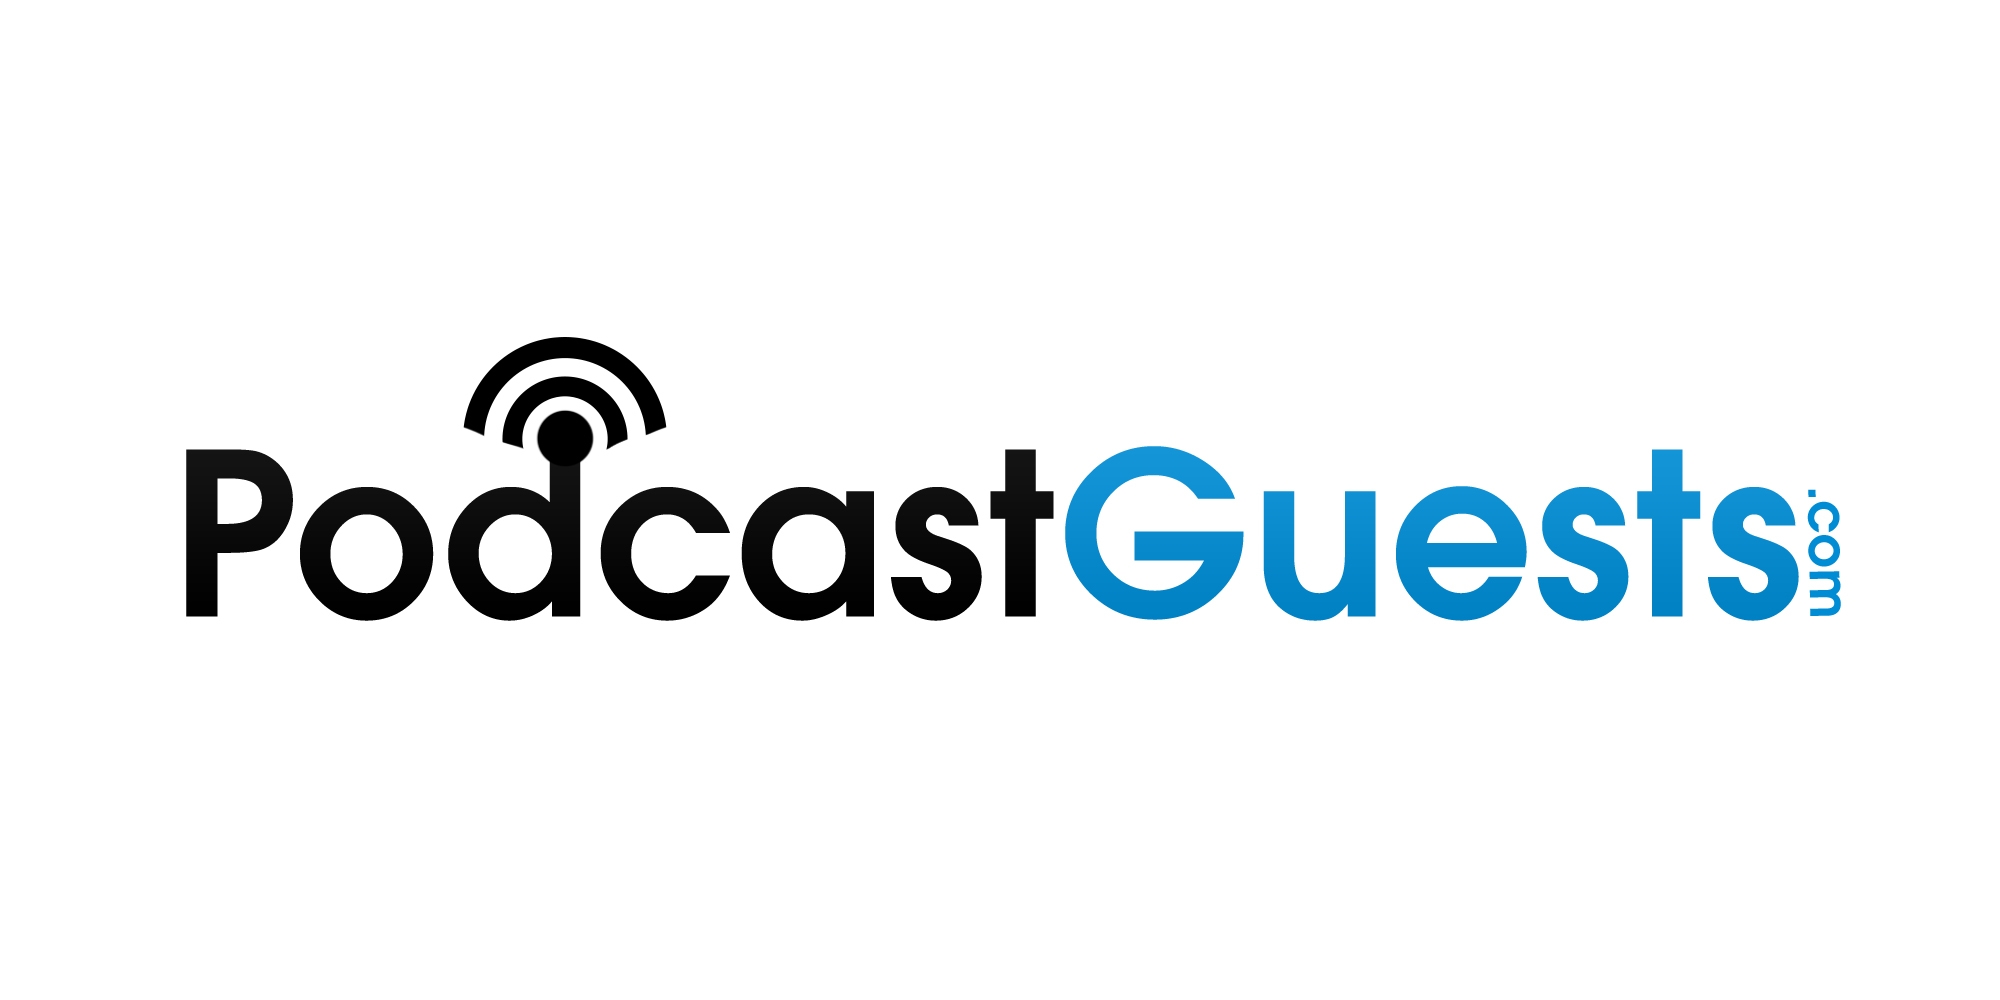 Podcast Equipment Recommendations For Guests Podcast Bookers